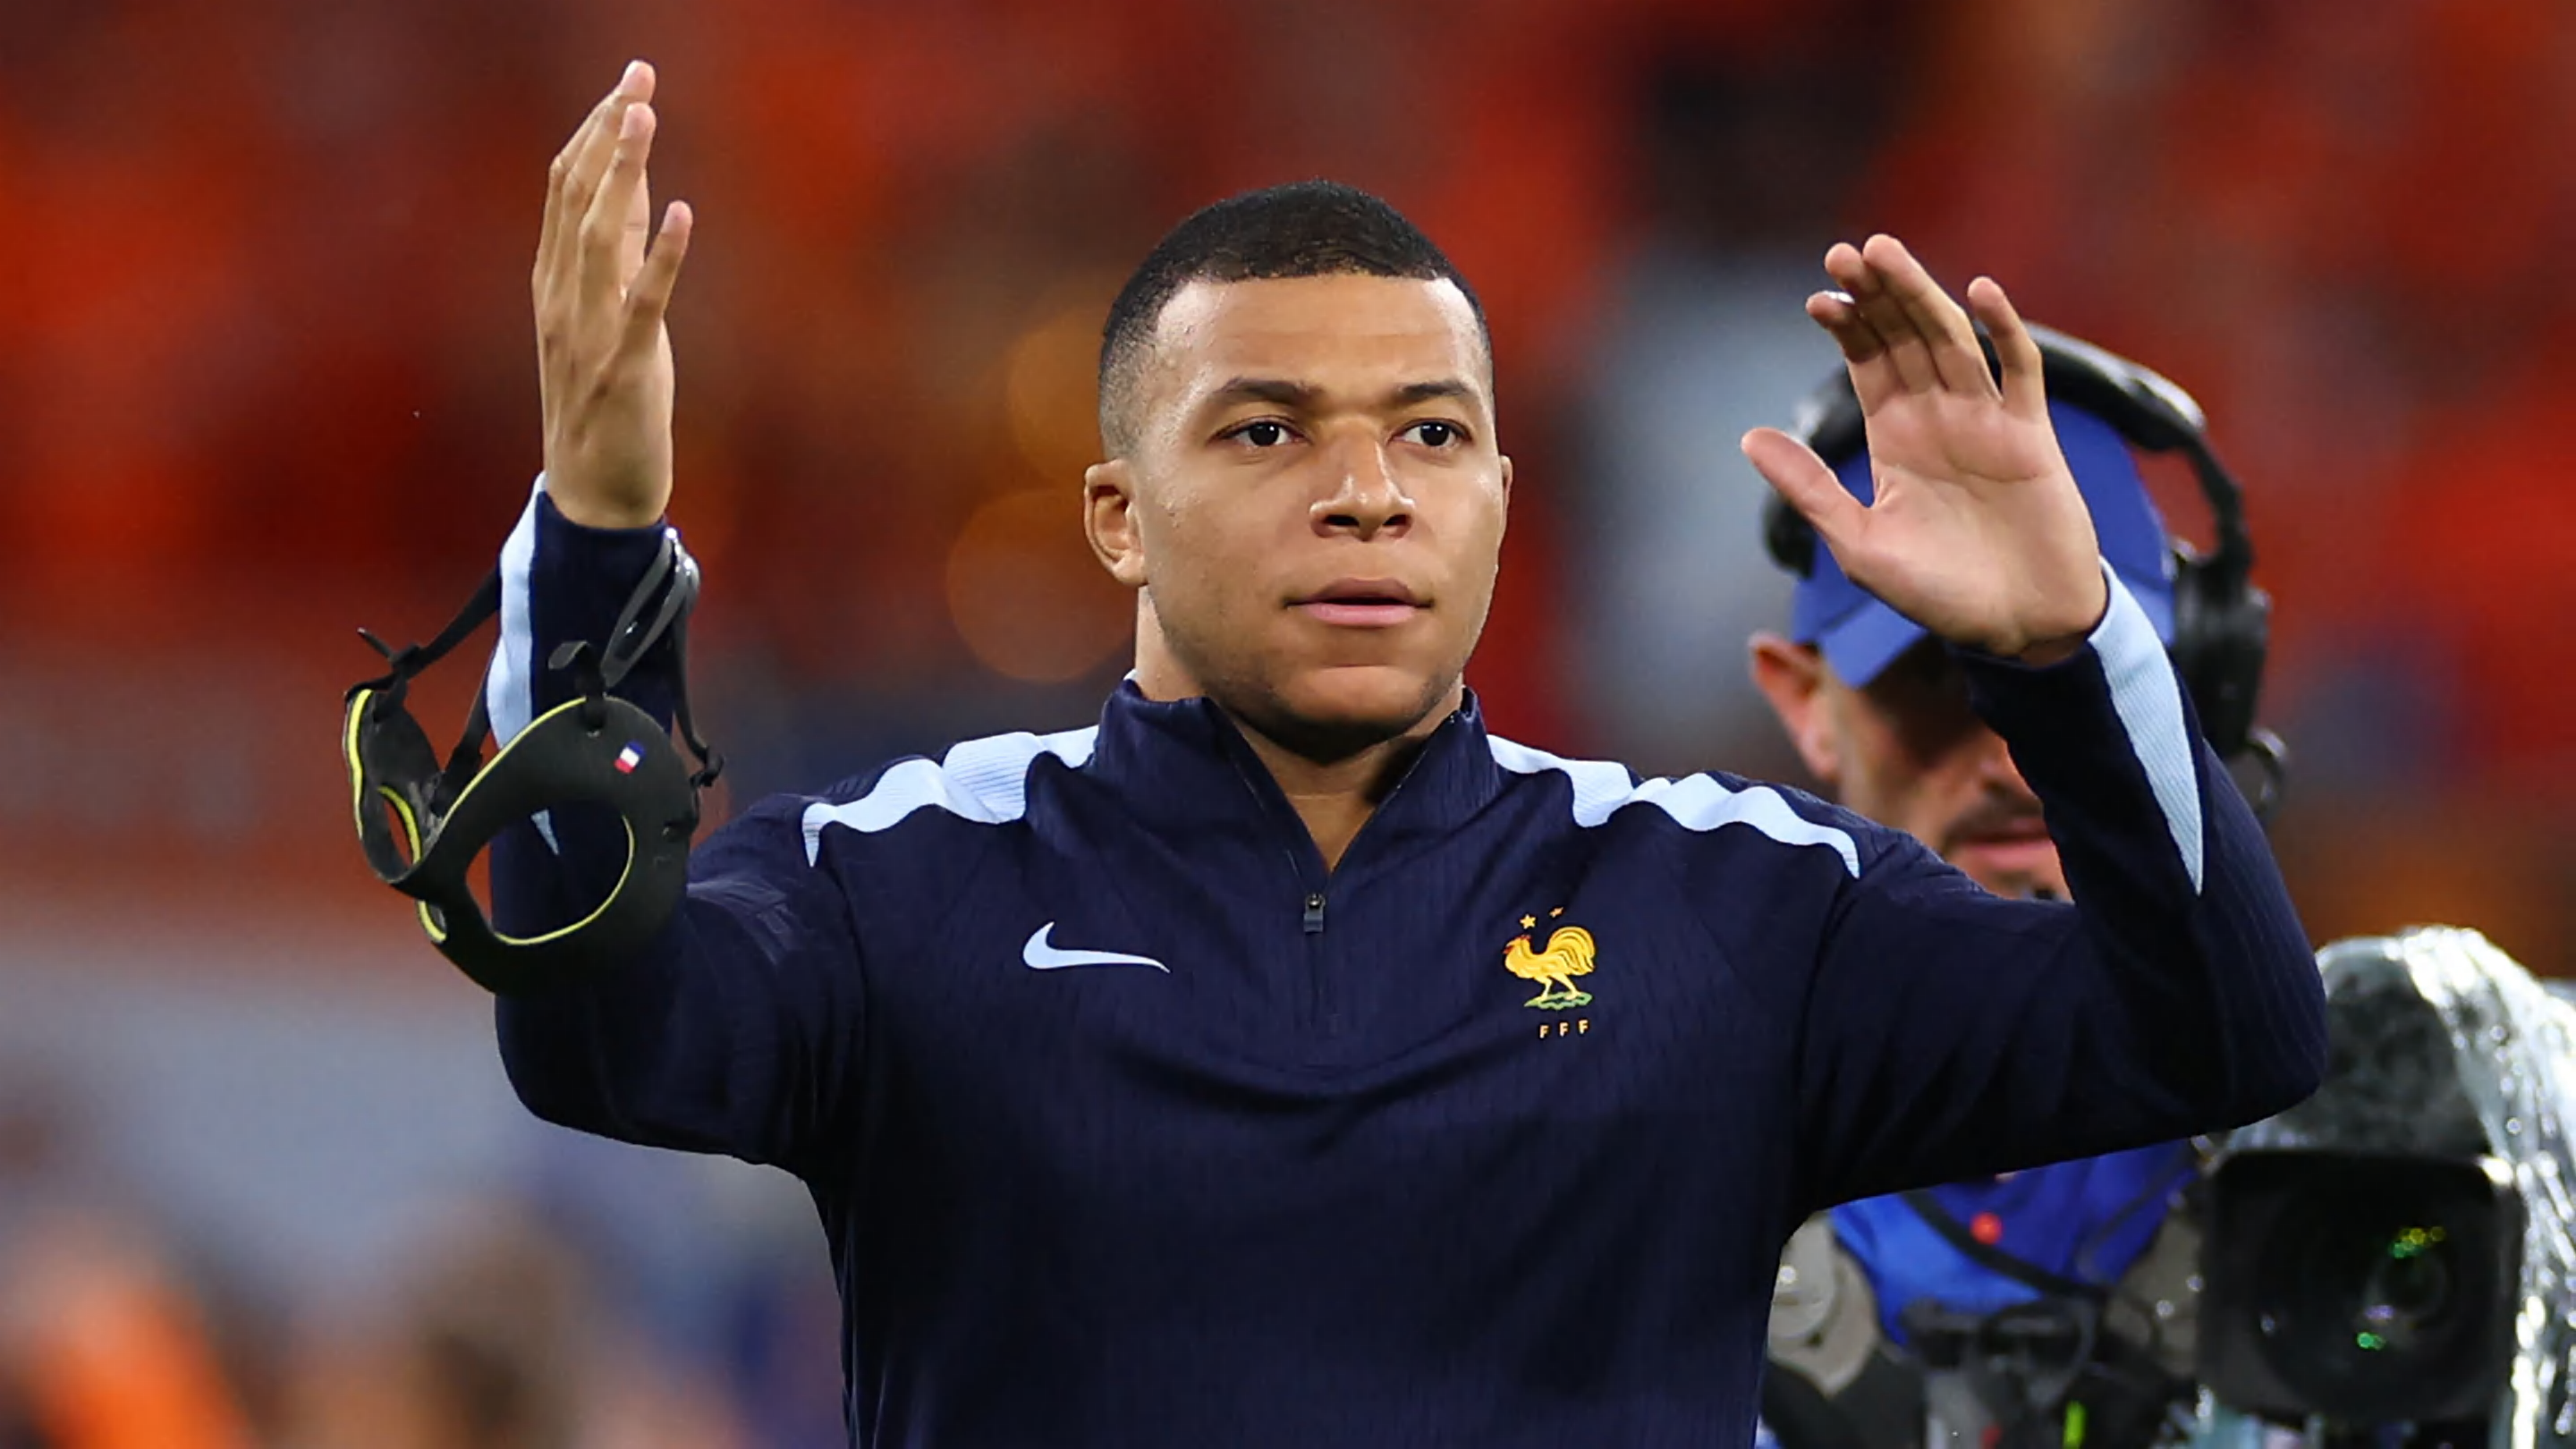 Kylian Mbappe wins big on night of France and Netherlands' drab draw